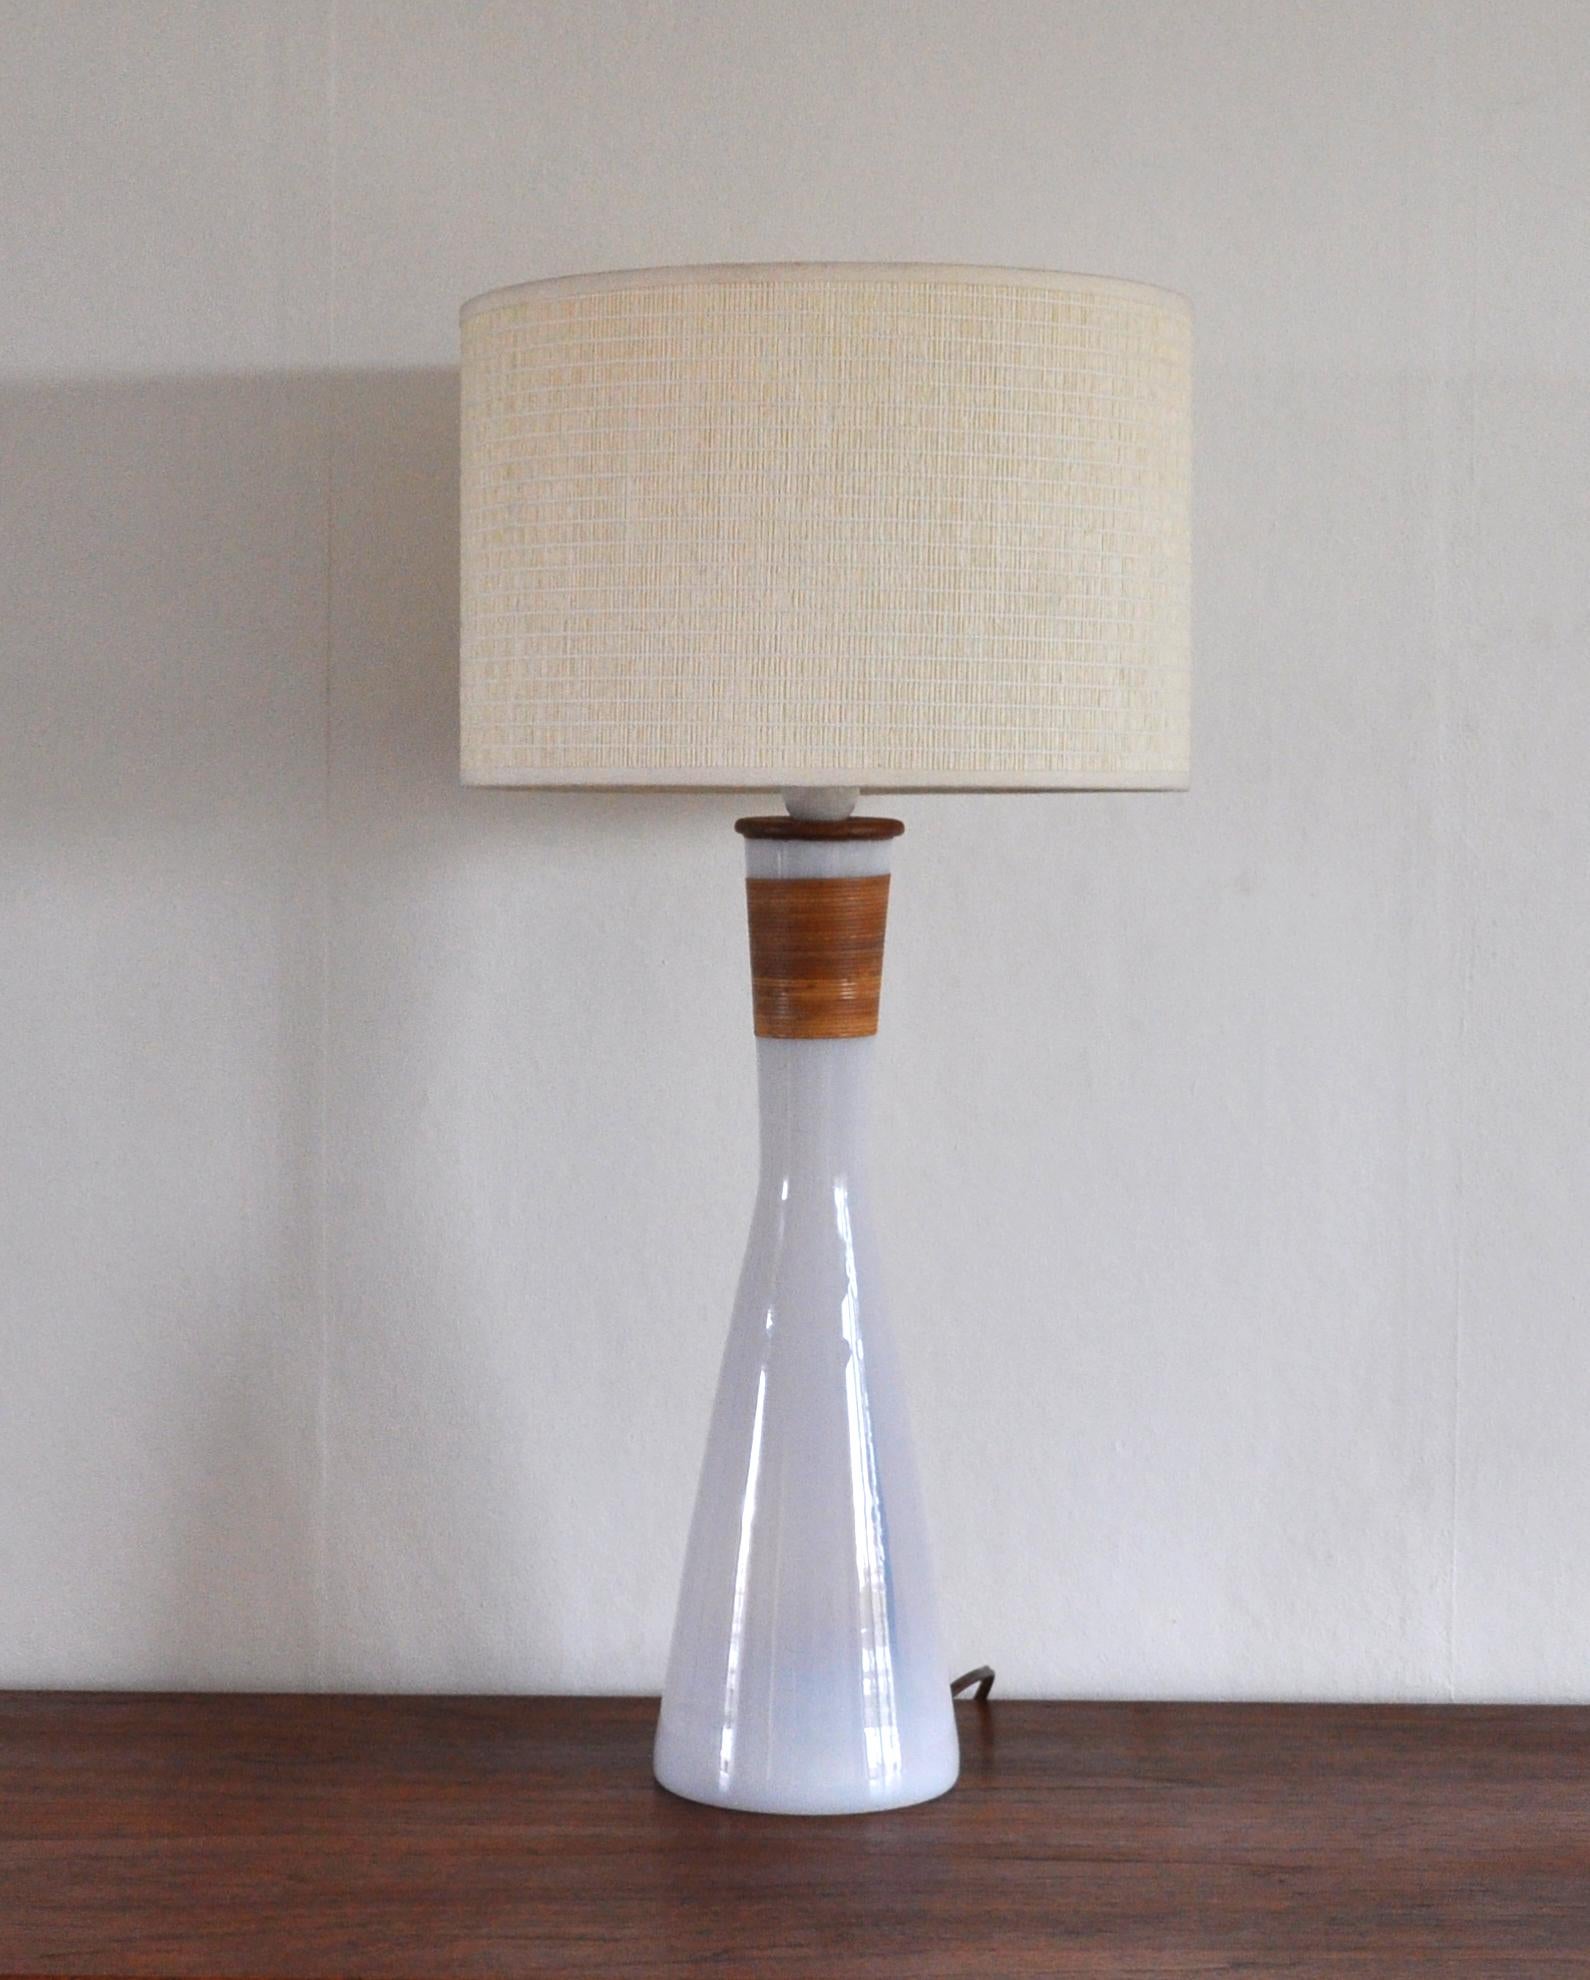 Table lamp by Jacob E. Bang in white milk glass wrapped with bamboo and teak finish. From the series Opaline, produced by Kastrup Glasværk, circa 1960. Kastrup Glasværk merged with Holmegaard in 1965.
Comes without shade.

Dimensions:
Height 59